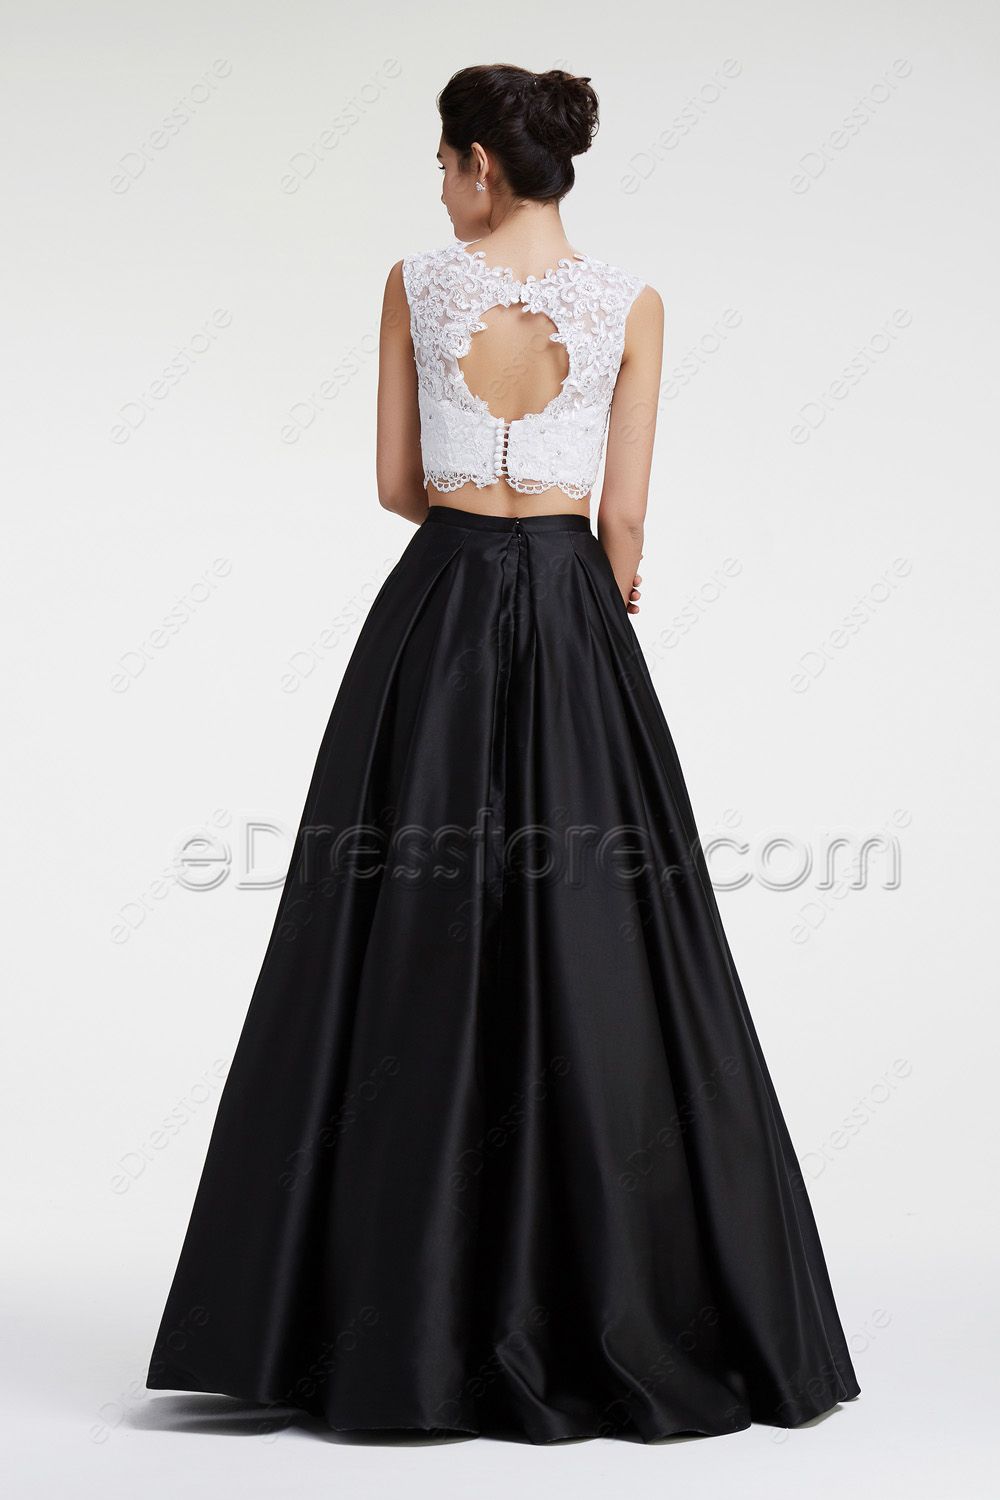 Ball Gown Black And White Gothic Wedding Dresses 2019 Strapless Sweetheart  Pleats Tulle Women Vintage Bridal Gowns Non White Corset Back From 74,18 €  | DHgate